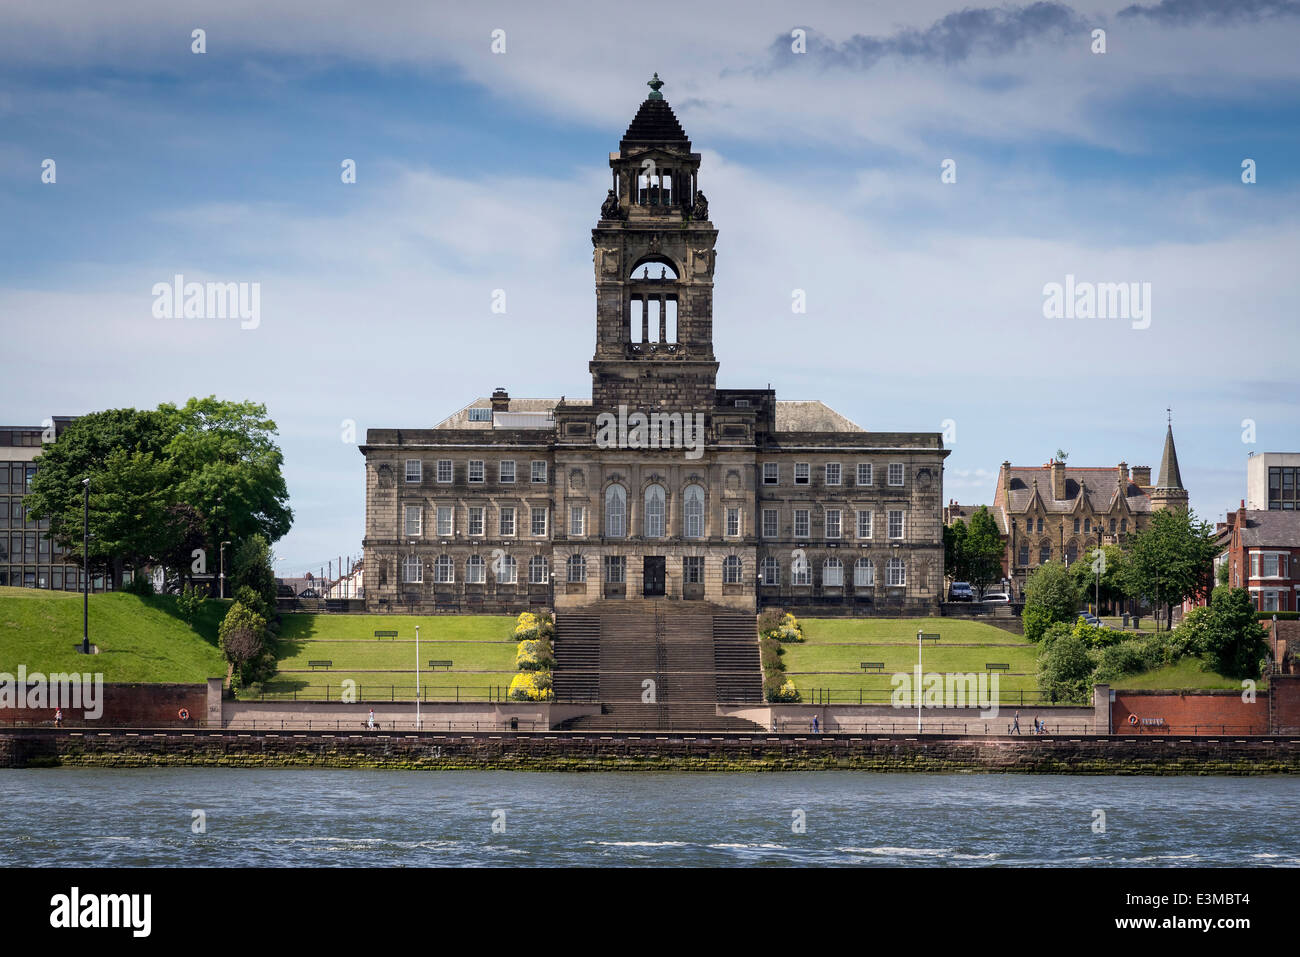 The town hall at Wallasey site of the Wirral Council meetings. The river Mersey in the foreground. Stock Photo